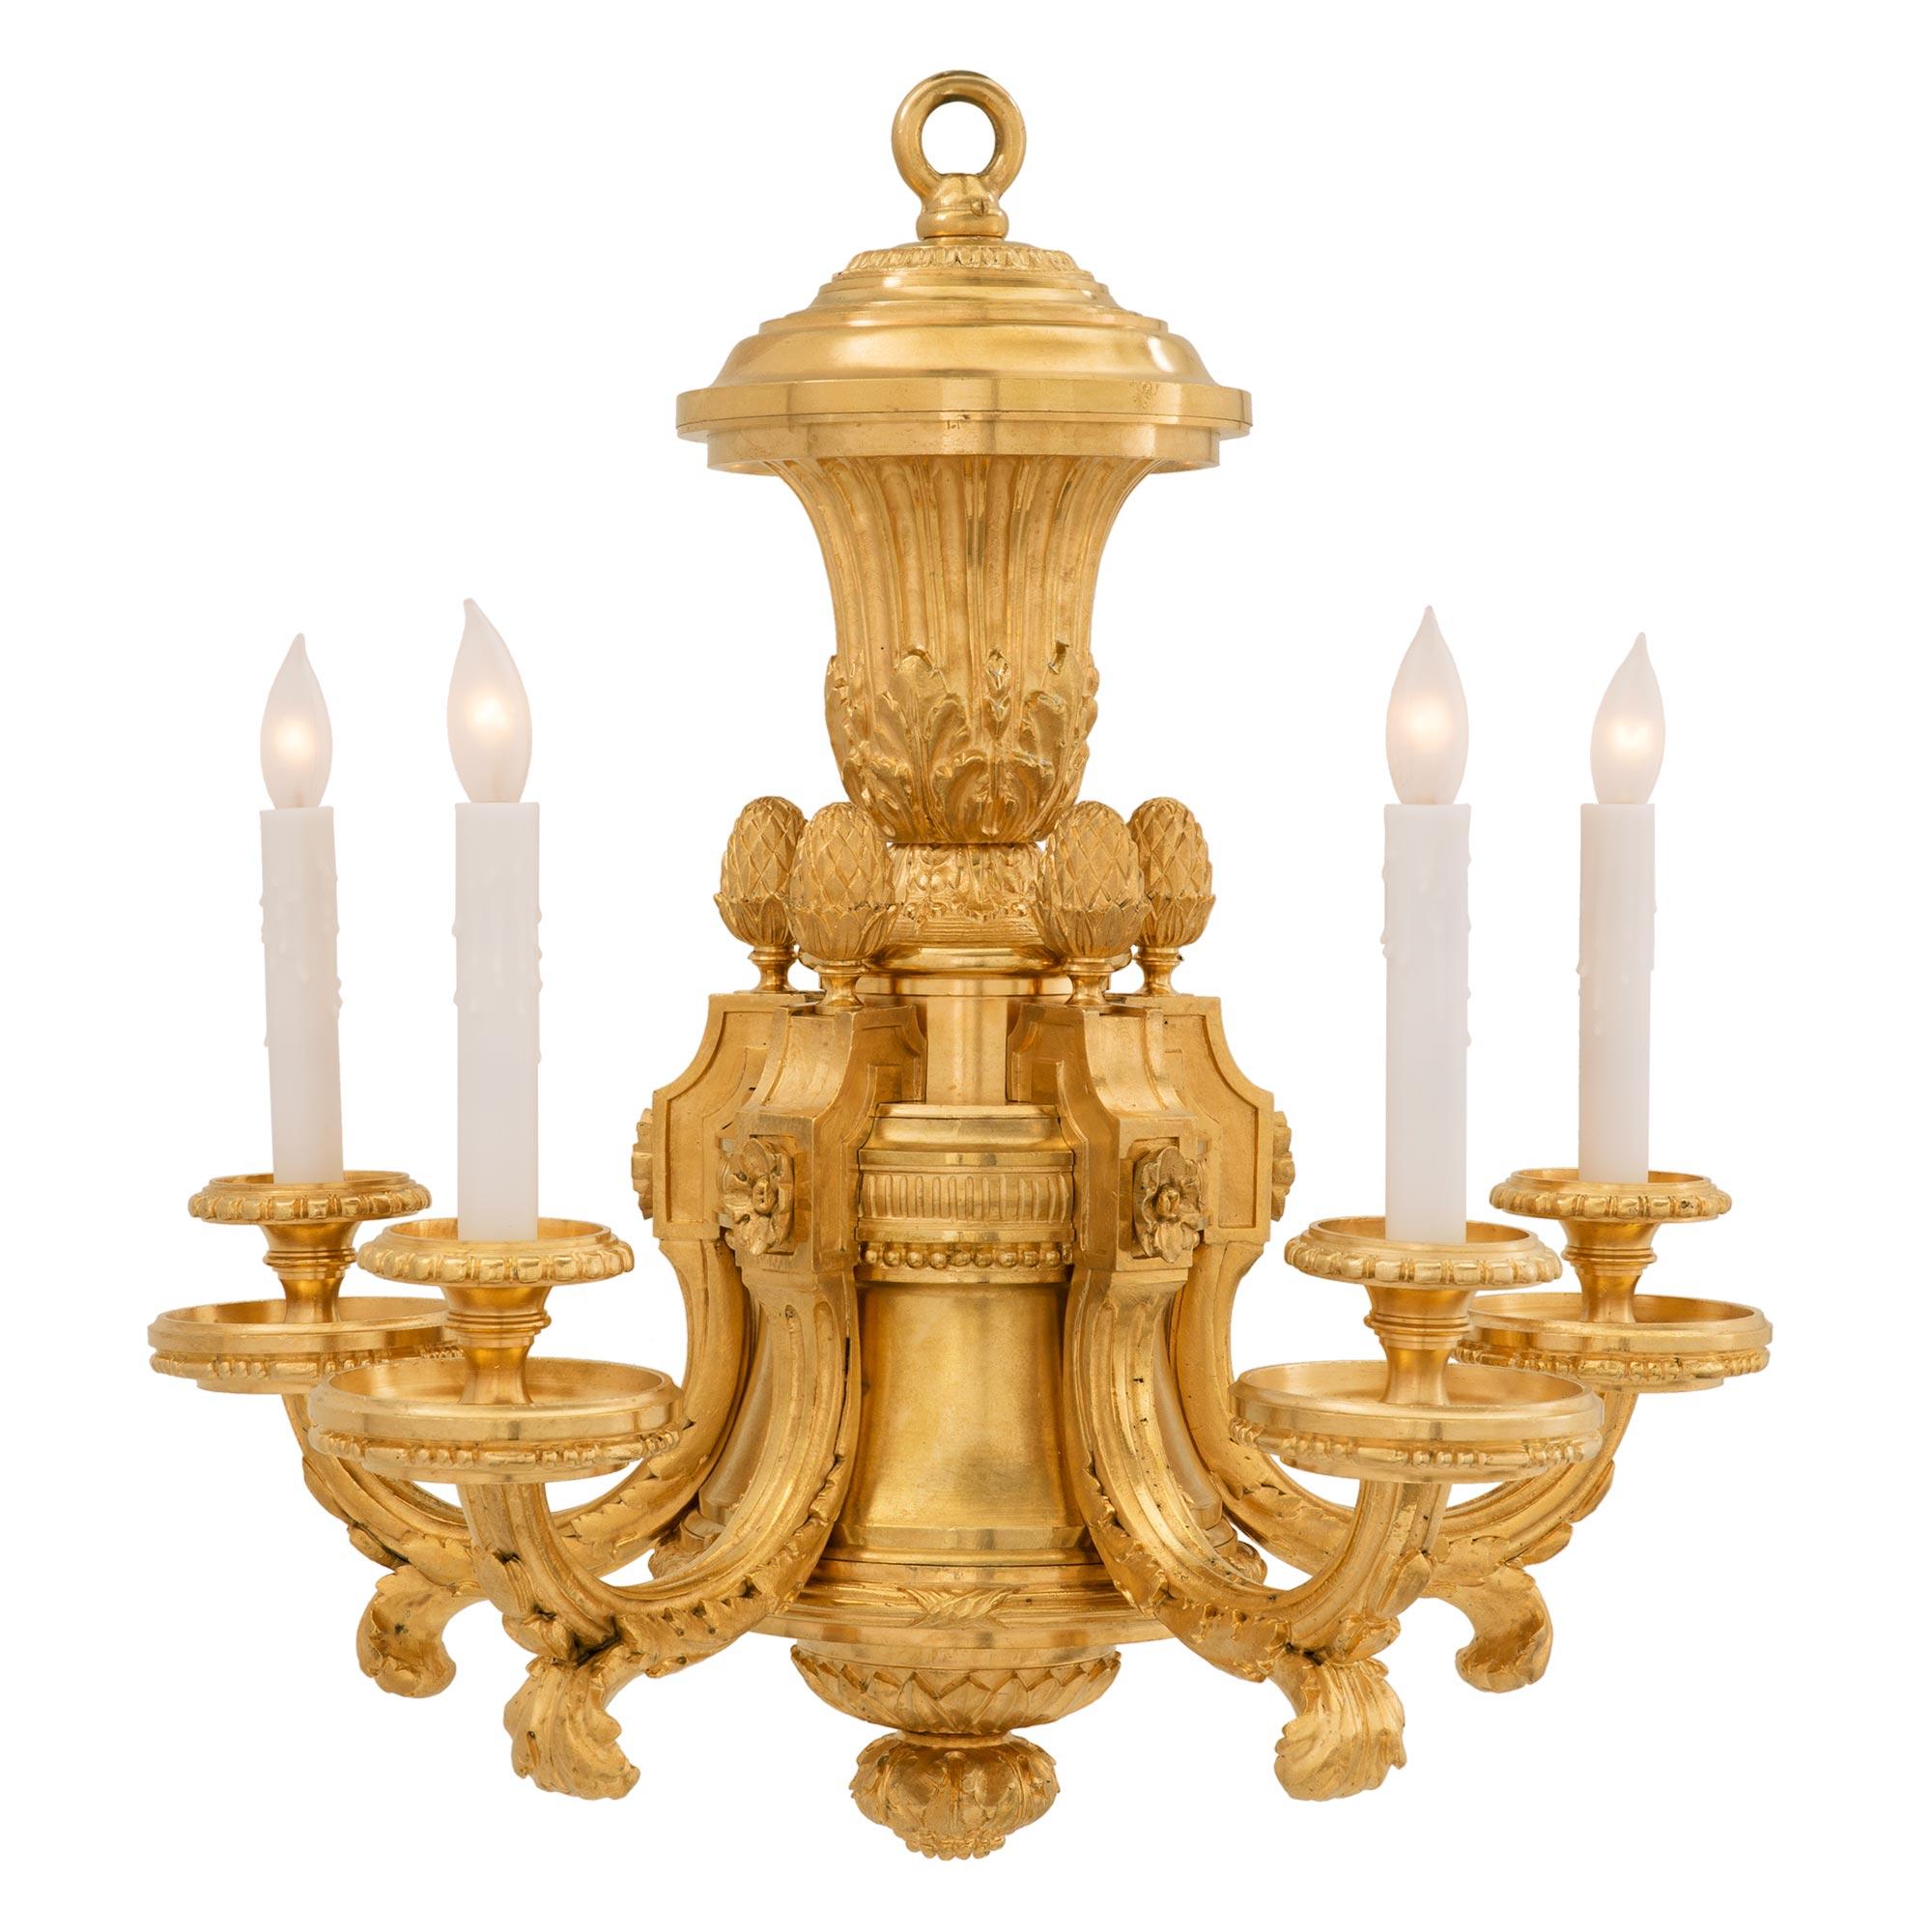 An exceptional French 19th century Louis XVI st. ormolu five arm chandelier. The chandelier is centered by a charming and richly chased bottom floral finial below fine palmettes and tied wrap around bands. Each of the five arms are adorned with